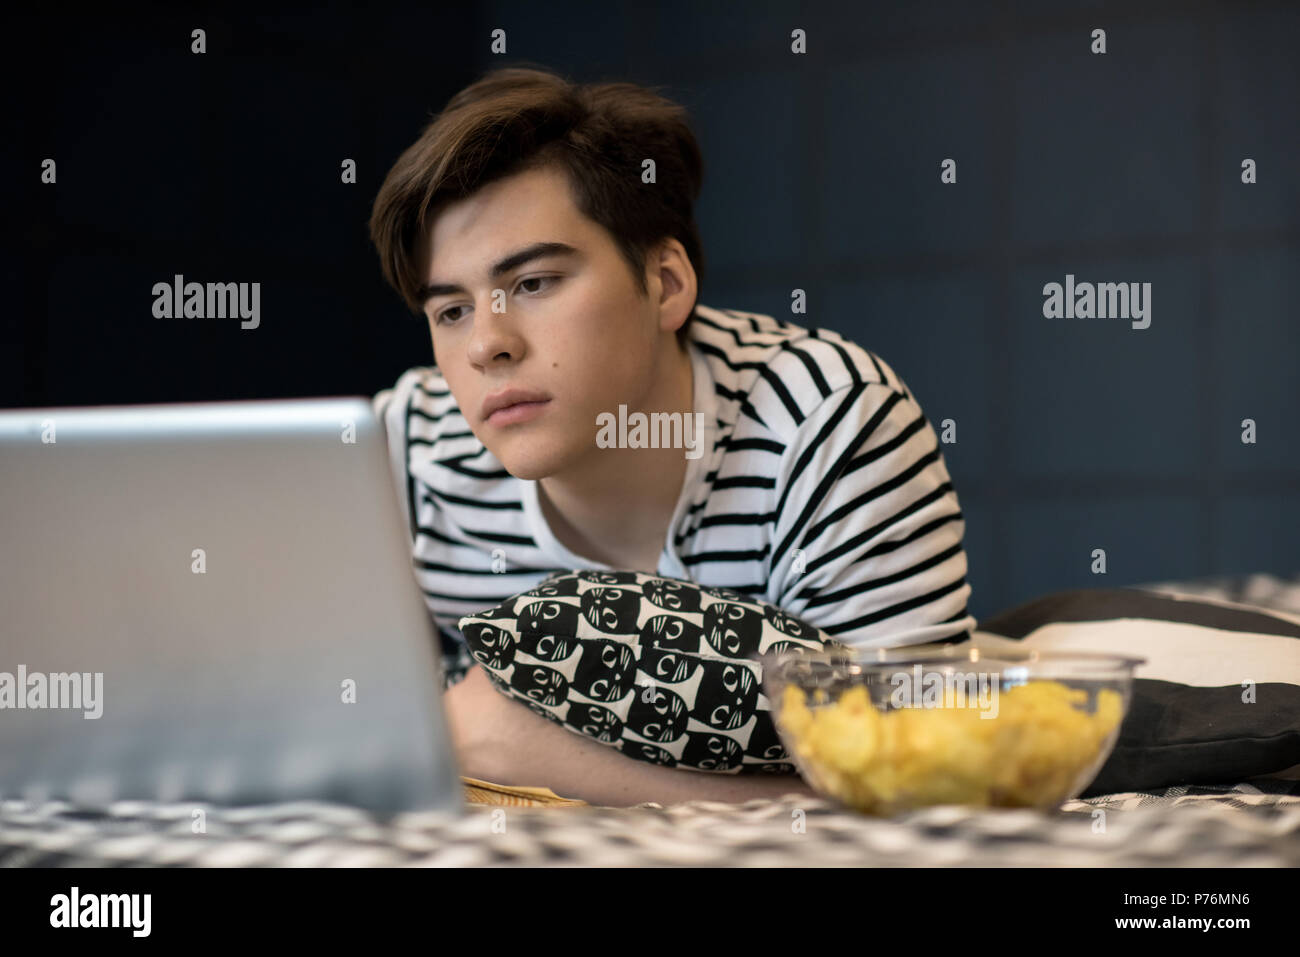 Handsome young male lying on bed with bowl of chips and reading on laptop screen. Stock Photo